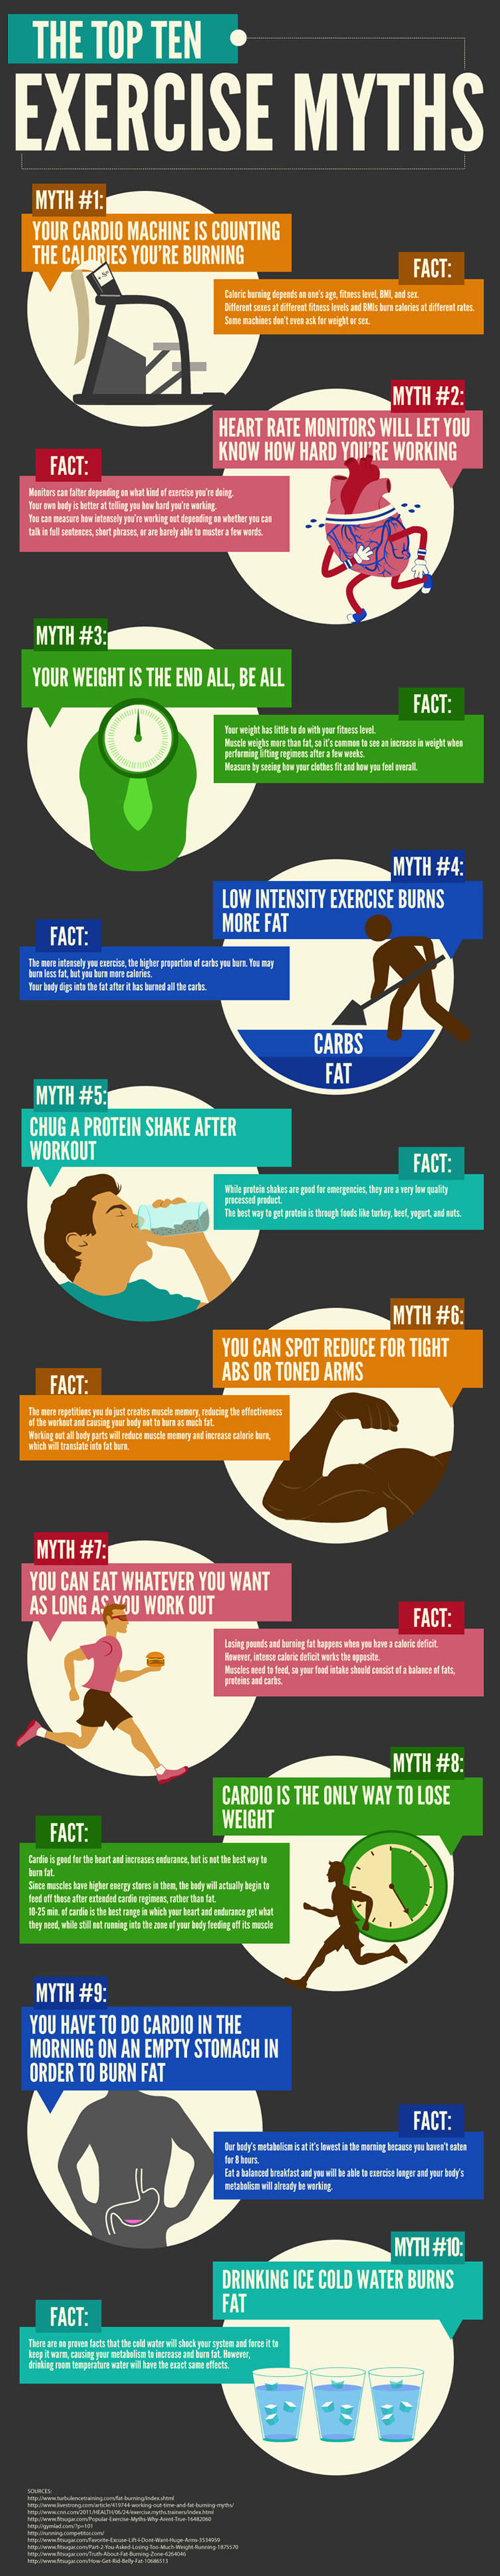 Top 10 Exercise Myths - Health Infographic